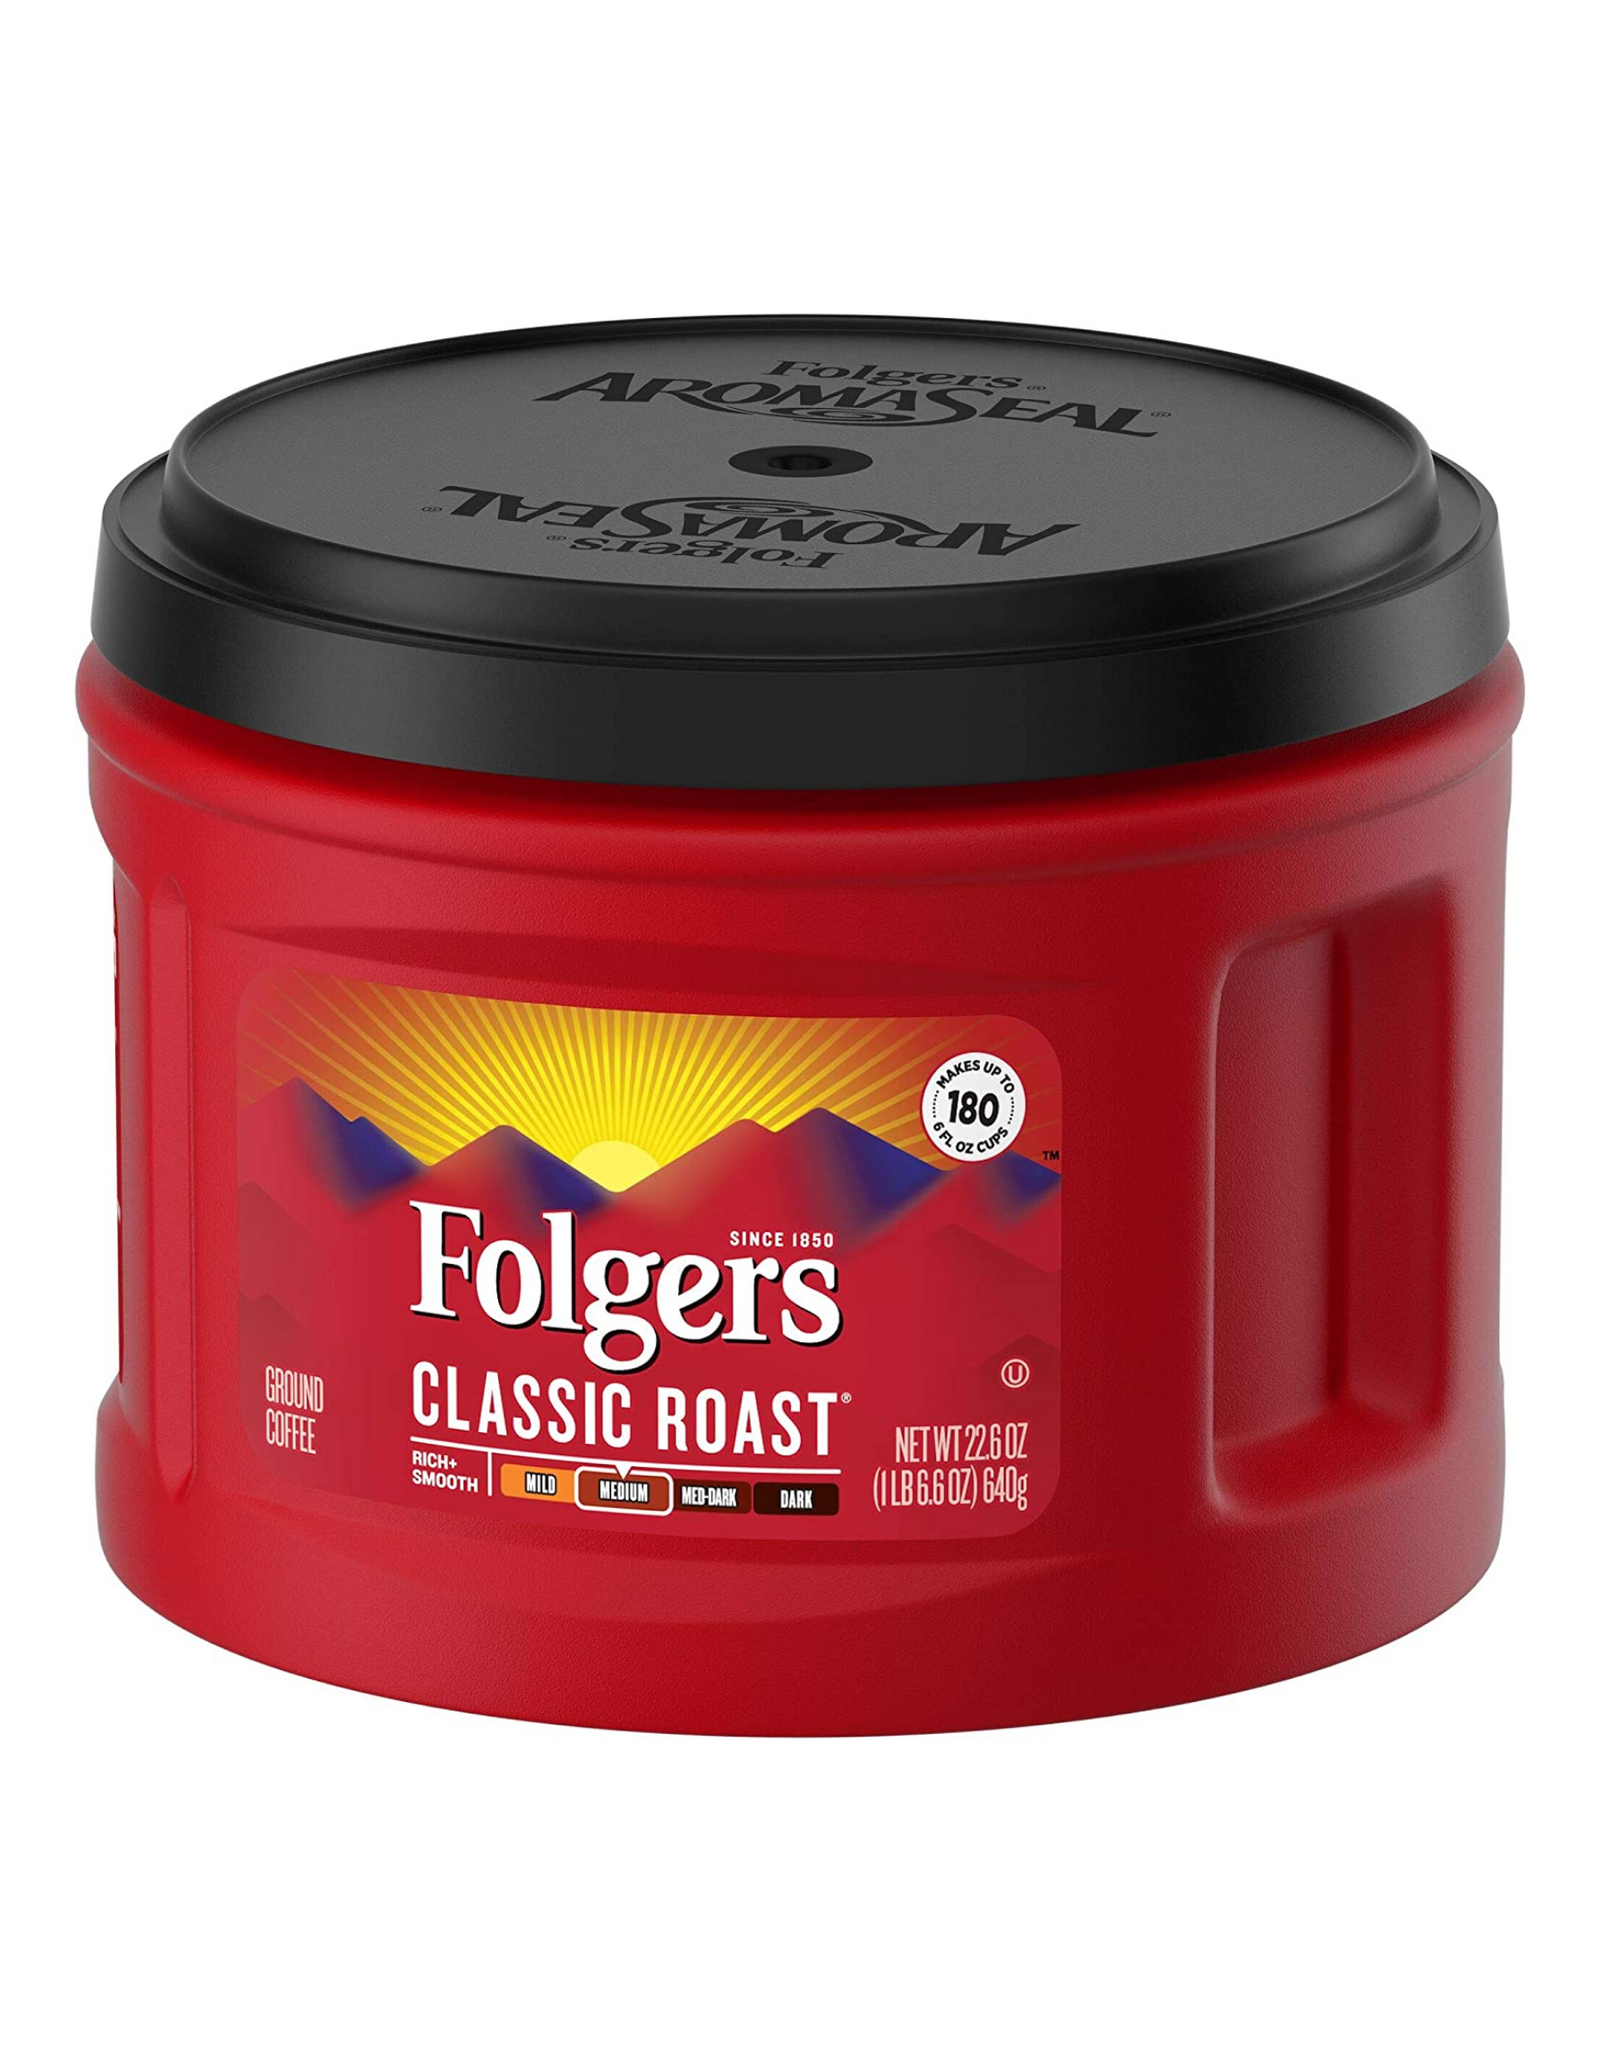 Folgers Classic Roast Medium Roast Ground Coffee, Rich and Smooth, 22.6 oz (Pack of 3)